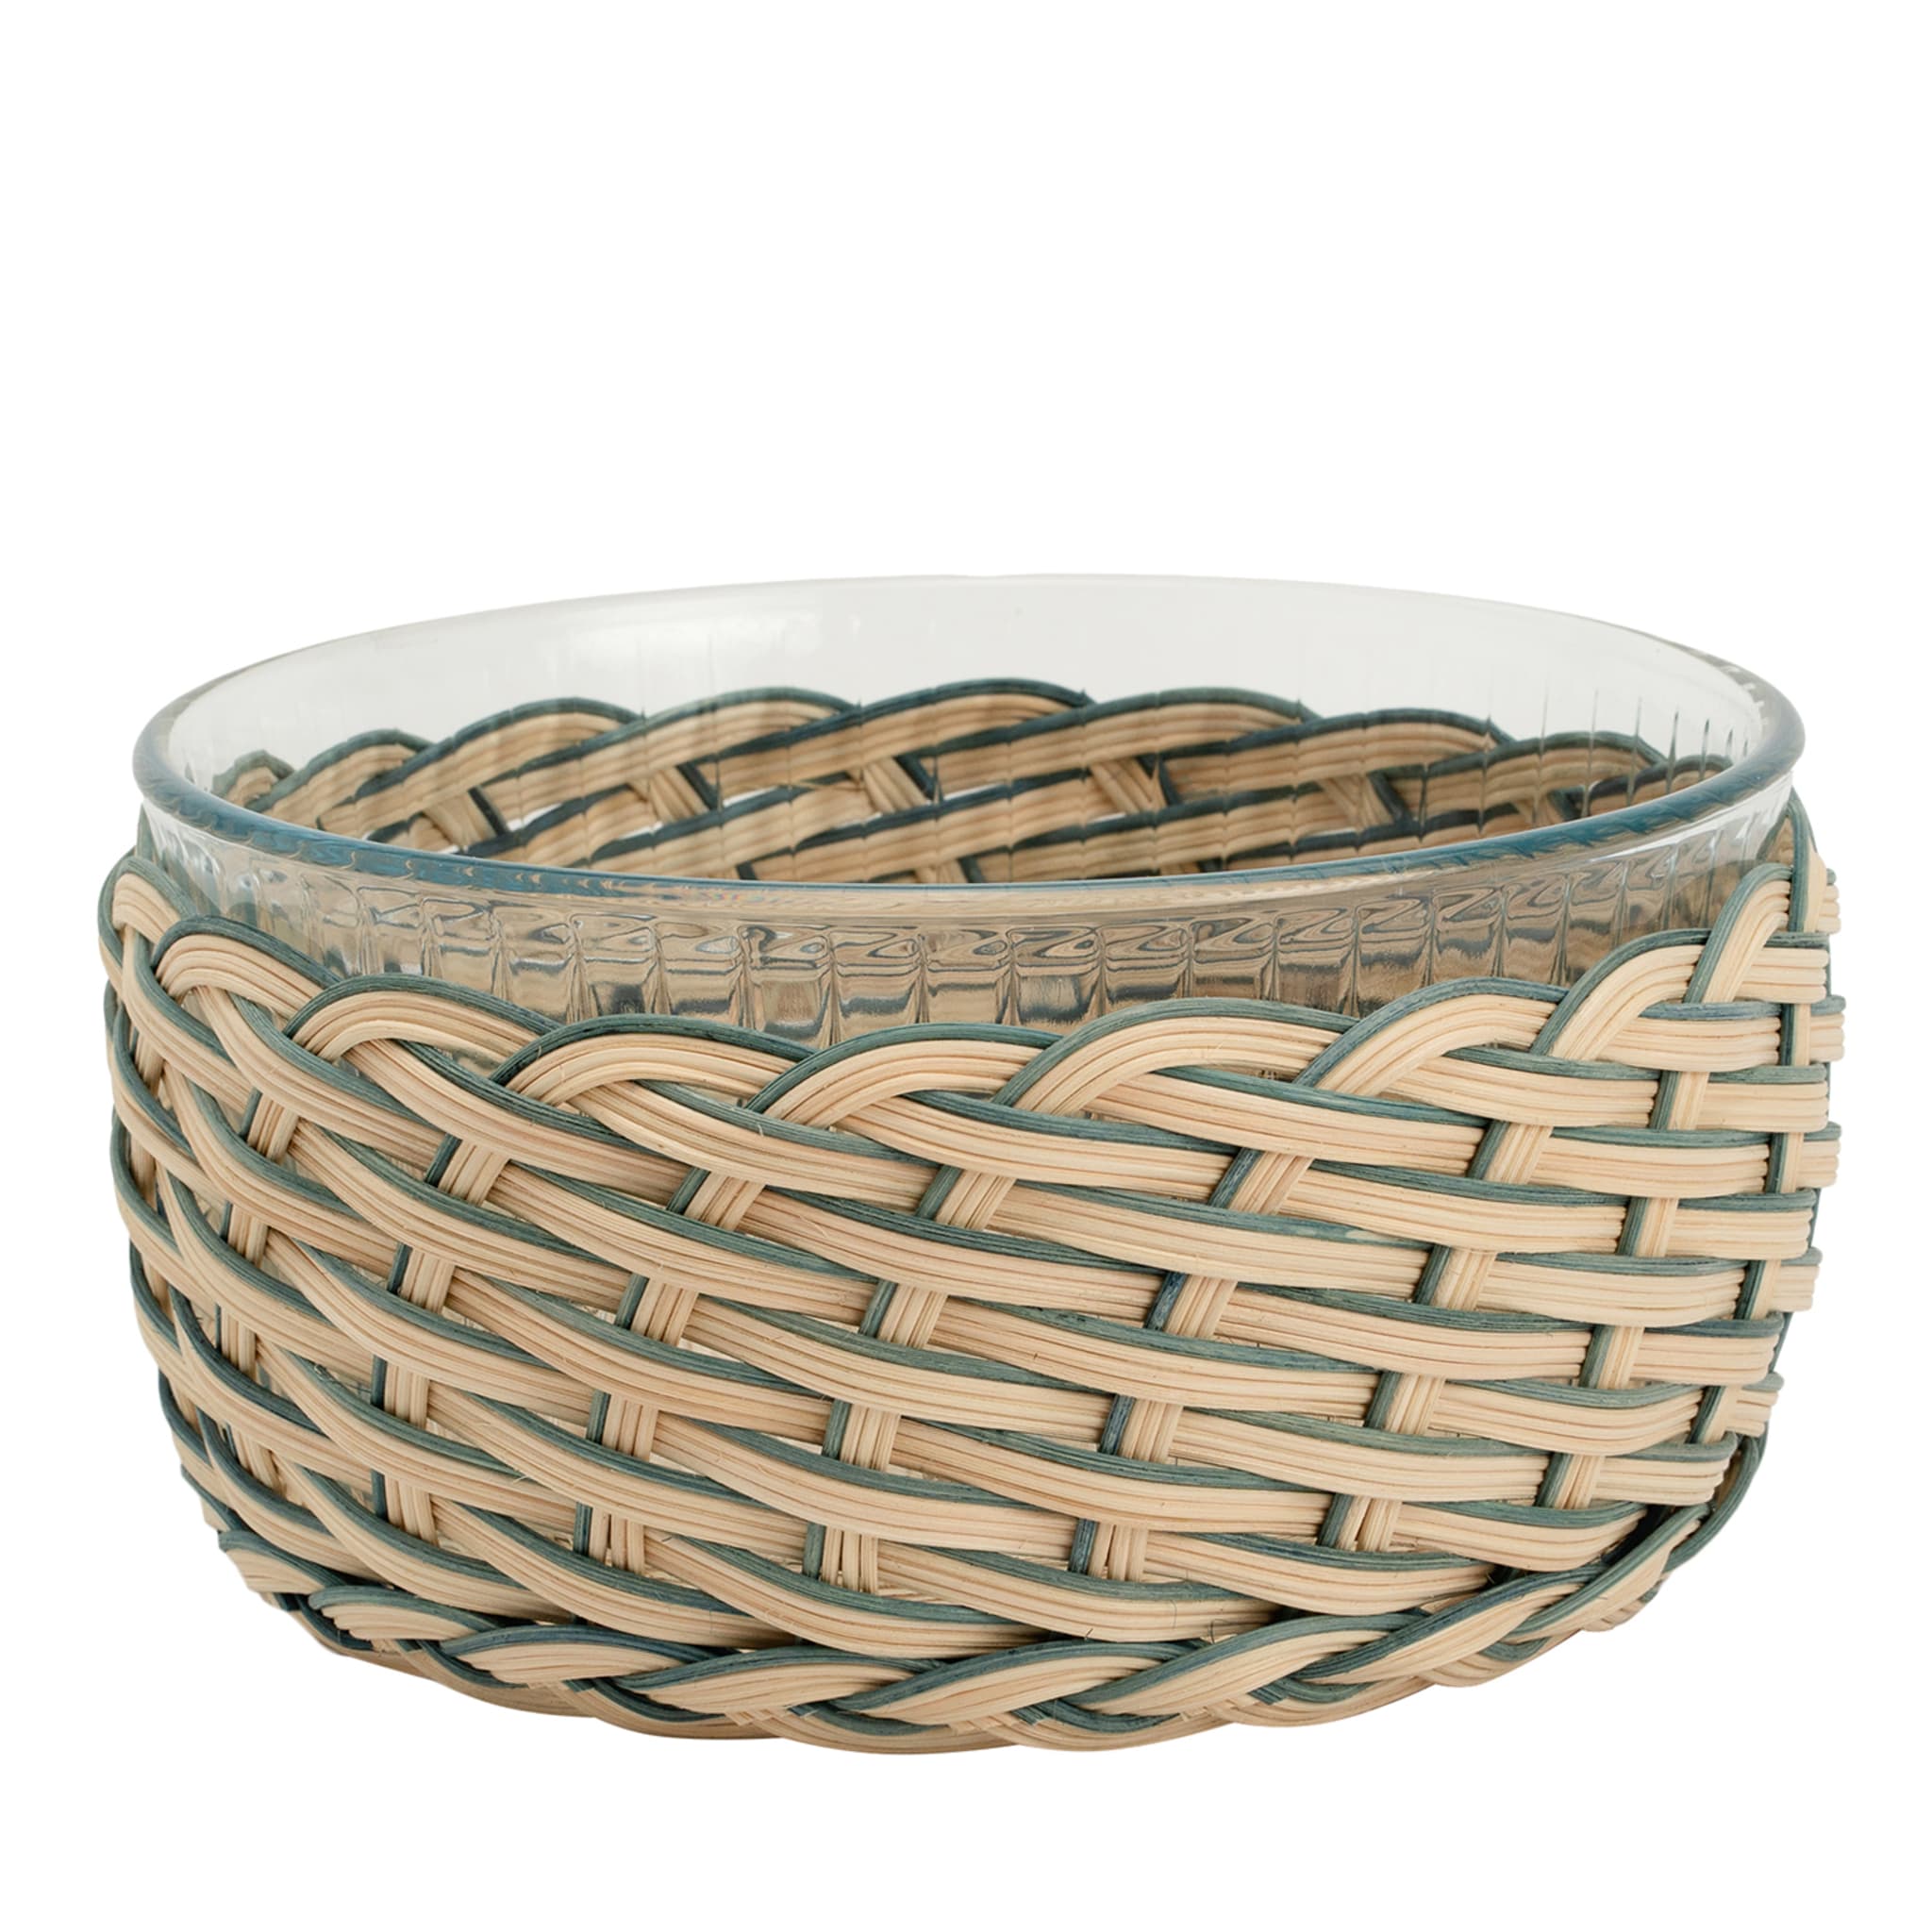 Soufflé Mold With Woad Blue Wicker Basket - Main view